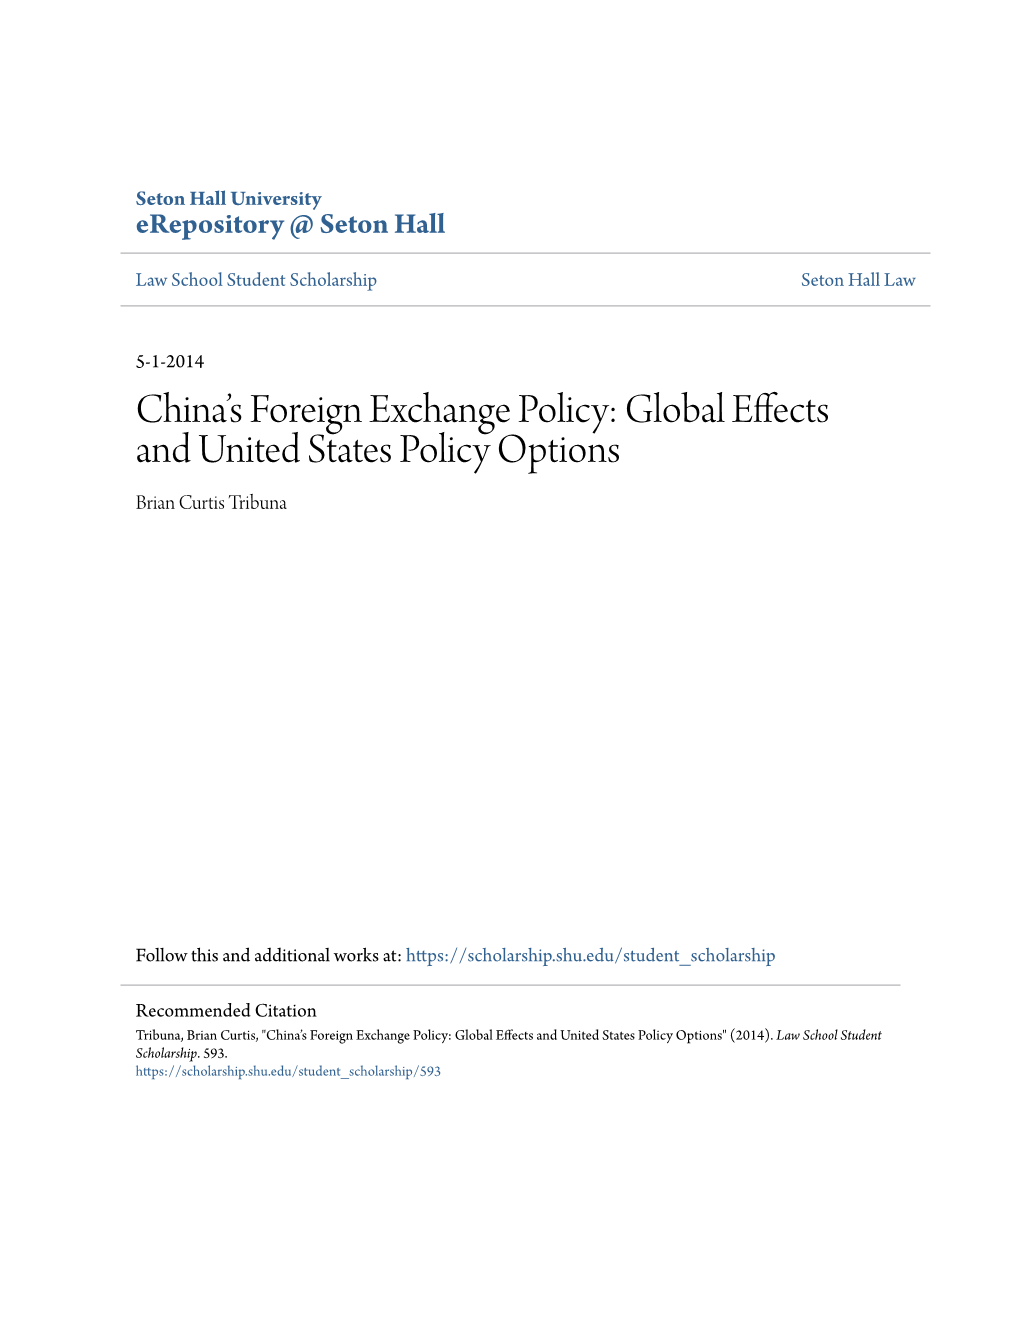 Global Effects and United States Policy Options Brian Curtis Tribuna